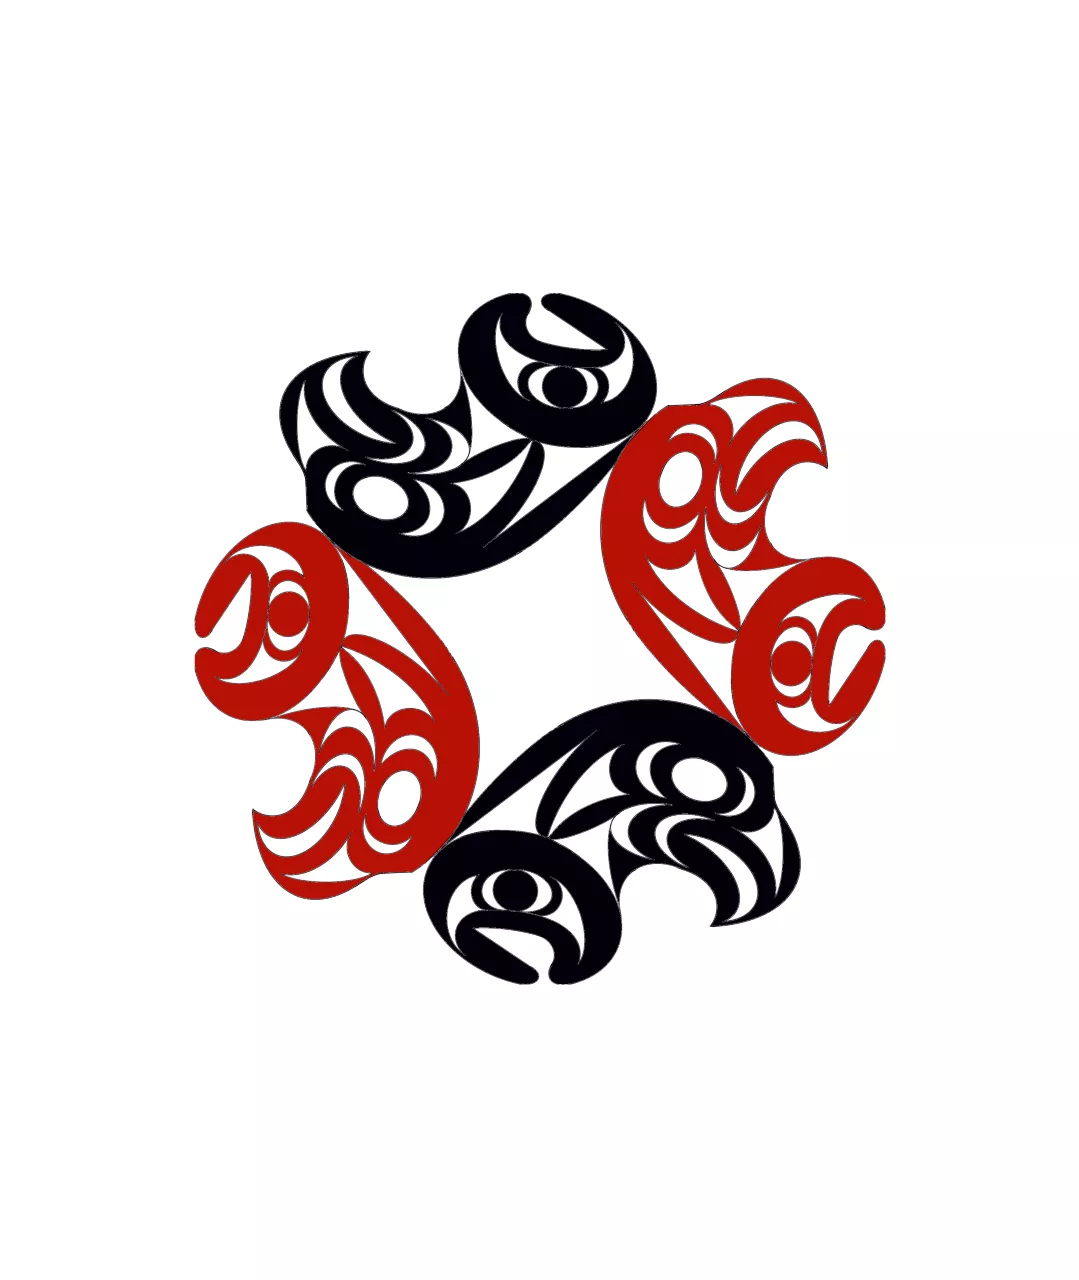 Four eagles in alternating black and red designed in a Native American graphic style, form a loose circular shape.